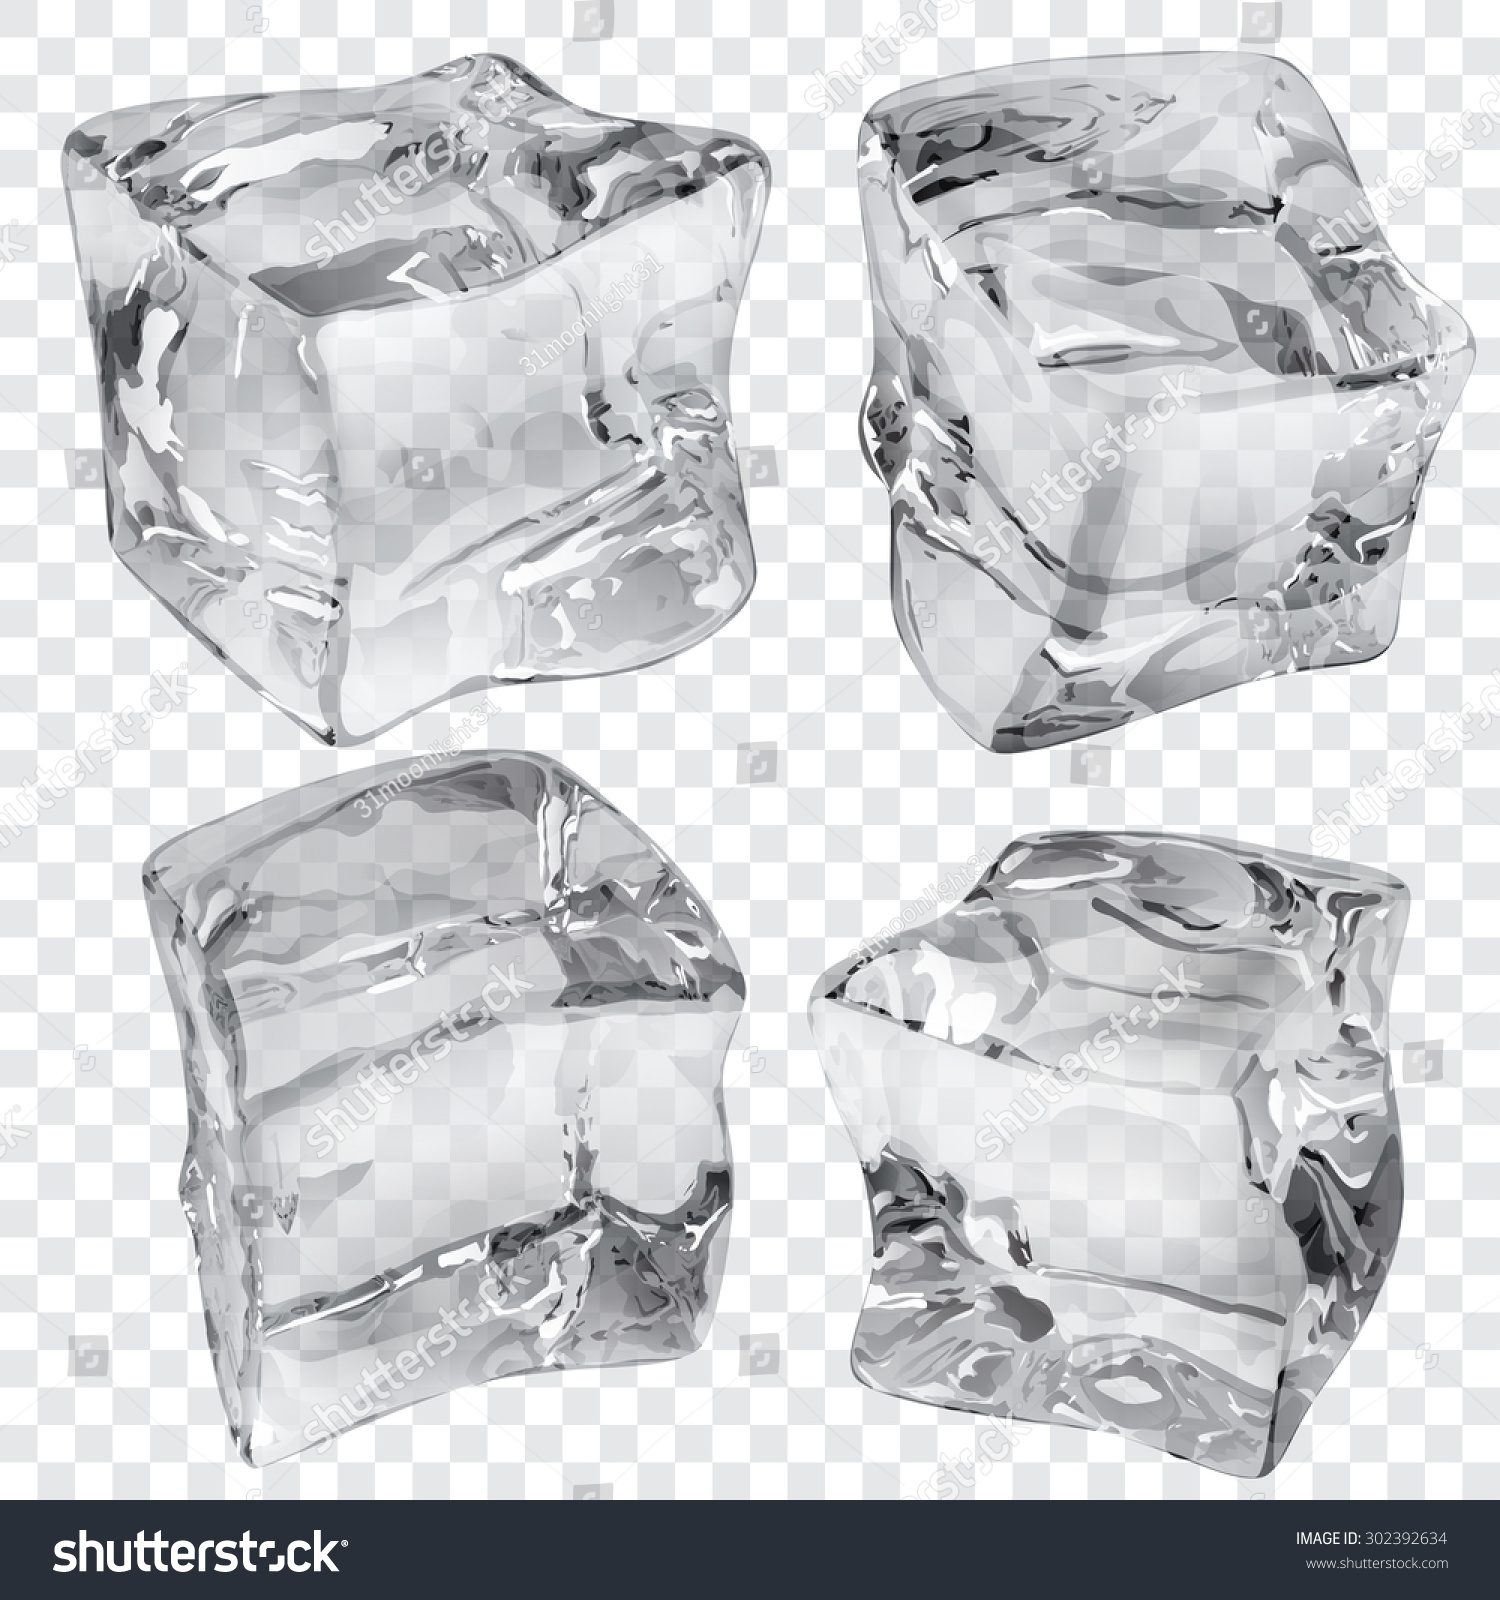 Set of four transparent ice cubes in gray colors #302392634